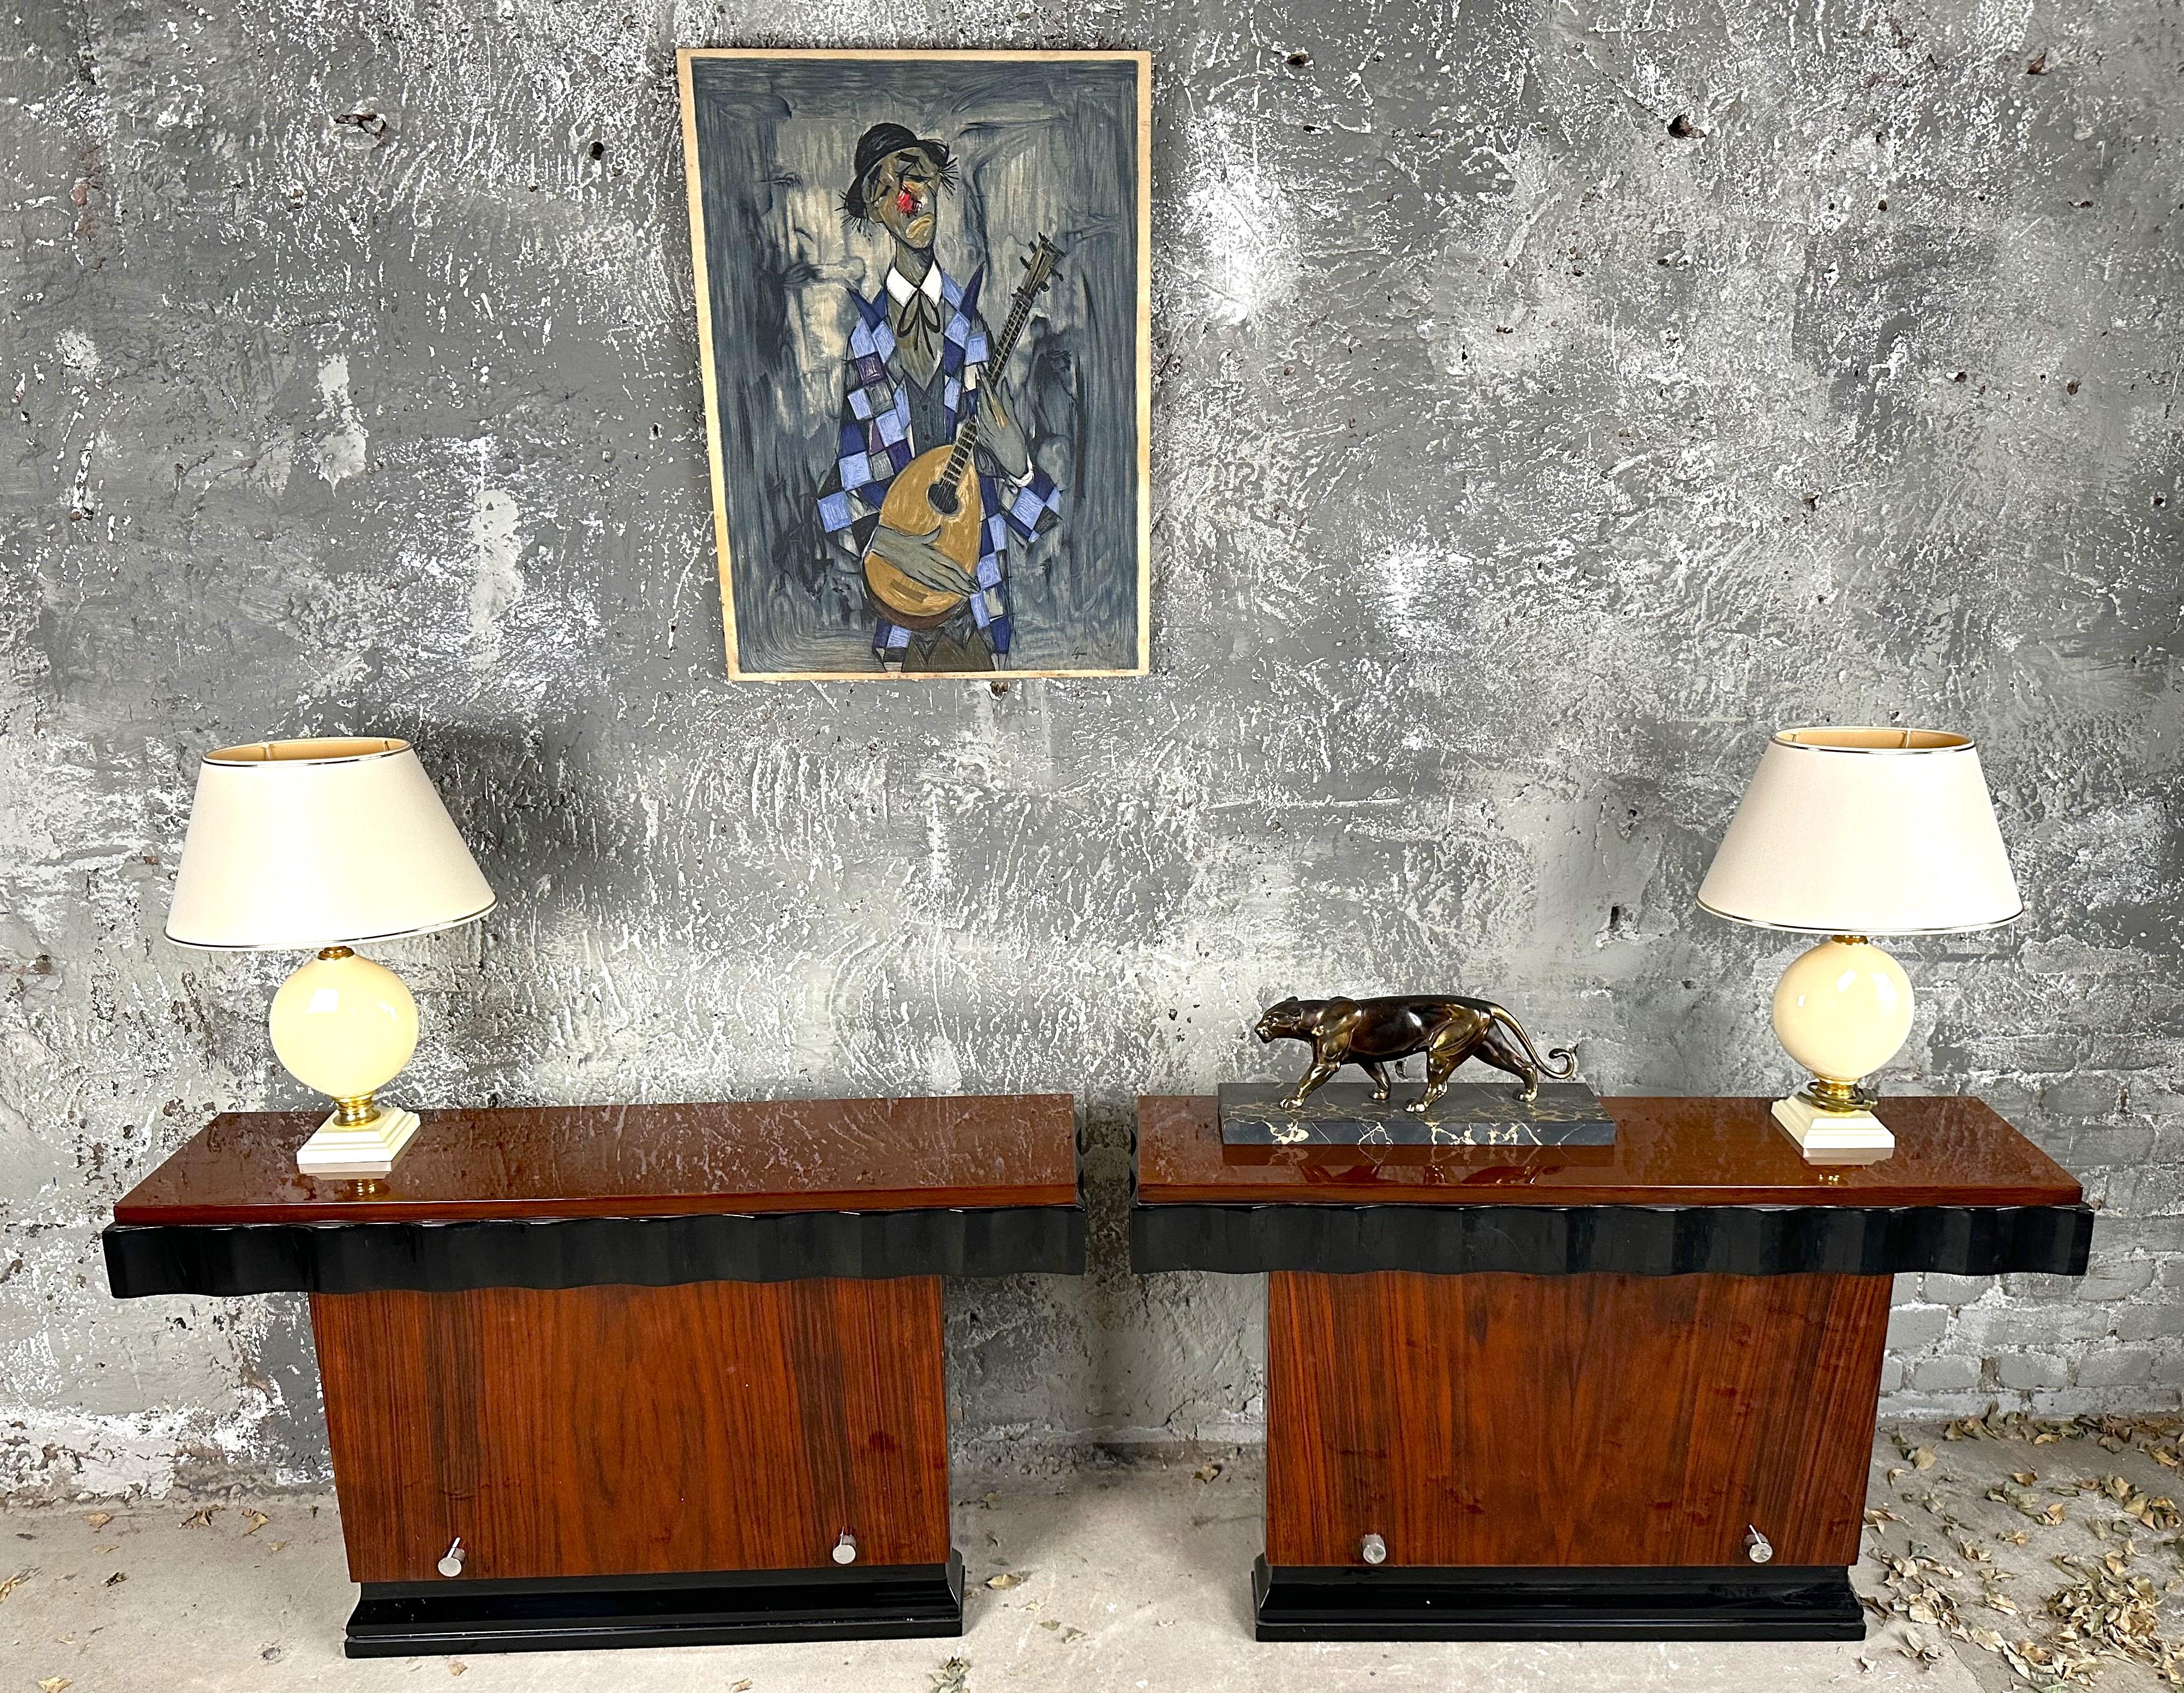 Art Deco Pair of Console Tables by Kristian Krass, France 1935.
high quality fully restored. high gloss lacquer, hand polished.
chrome details in perfect condition.
documentatation see pic from drouot auction.